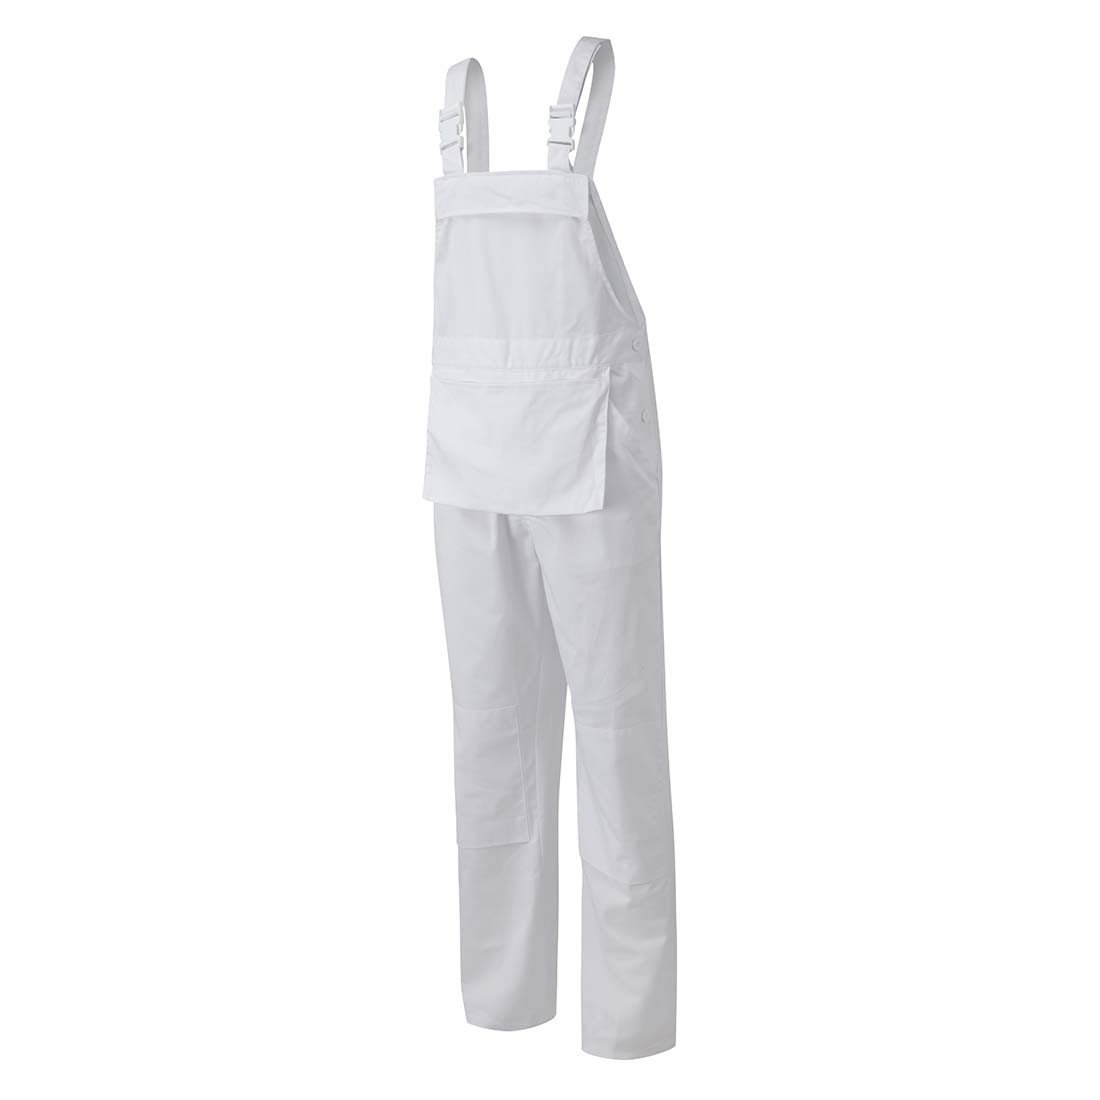 Fort 544 Painters Bib and Brace Overall in White